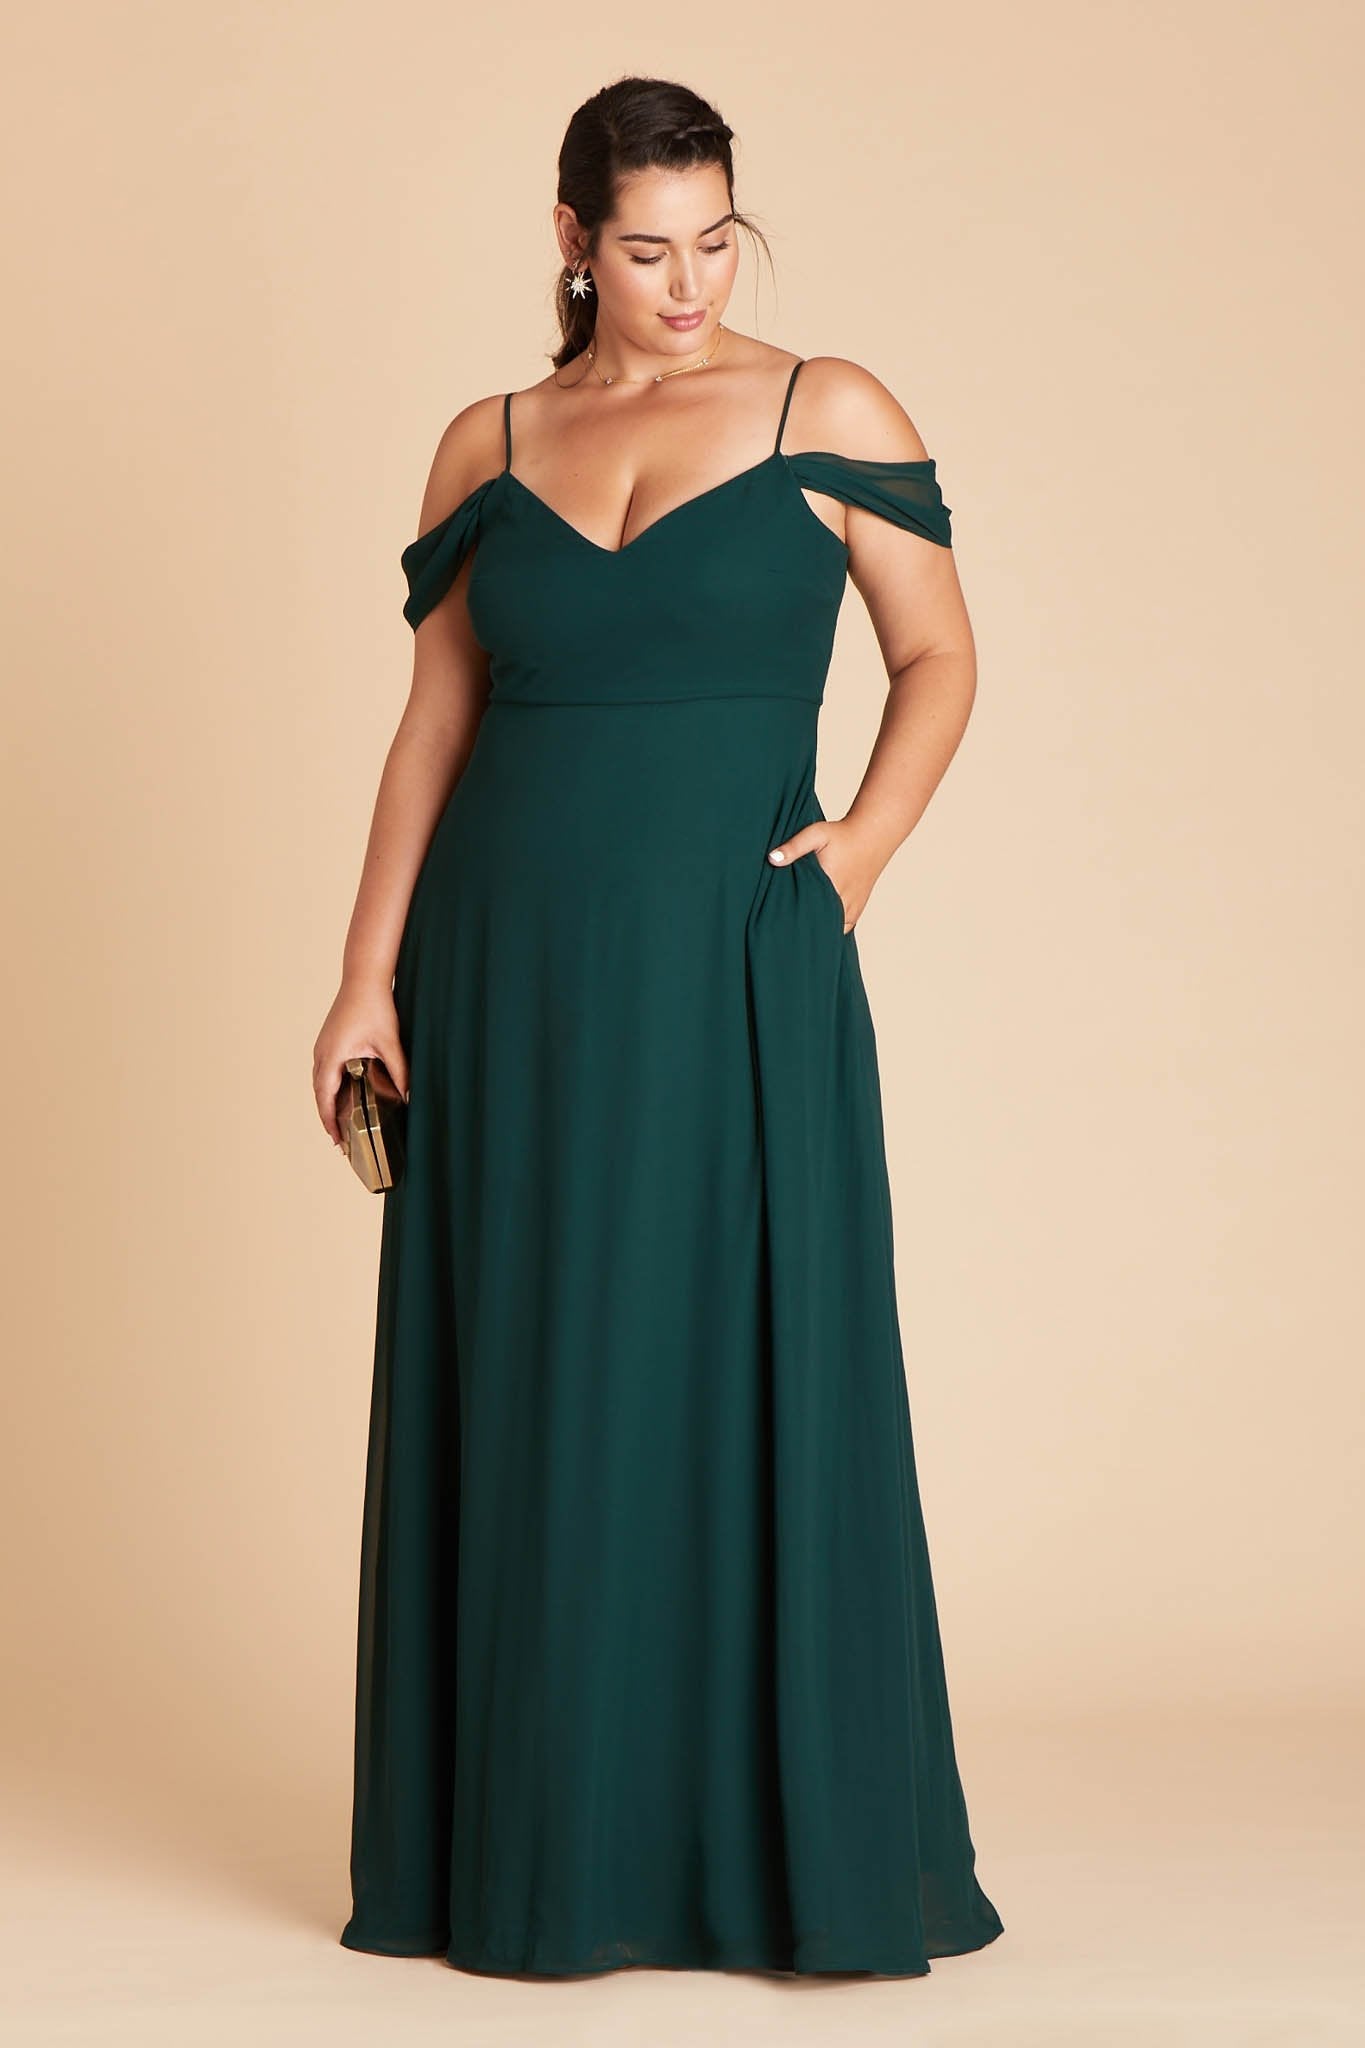 Front view of the floor-length Devin Convertible Plus Size Bridesmaid Dress in emerald chiffon worn by a curvy model with a light skin tone. The model rests her left hand in the hidden side pocket.